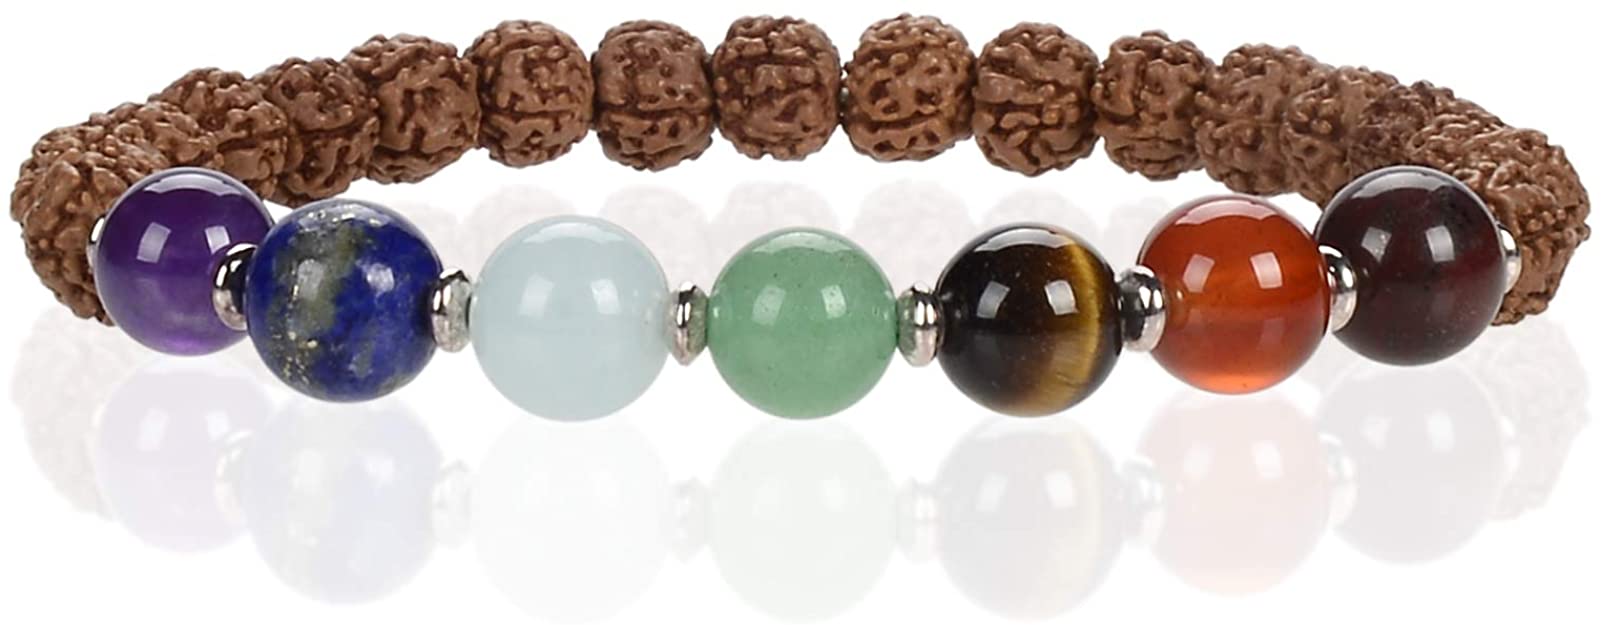 Cherry Tree Collection Chakra Stretch Bracelet | Genuine Natural 8mm Gemstones Beads, Sterling Silver Spacers | Men/Women | Small, Medium, Large Sizes